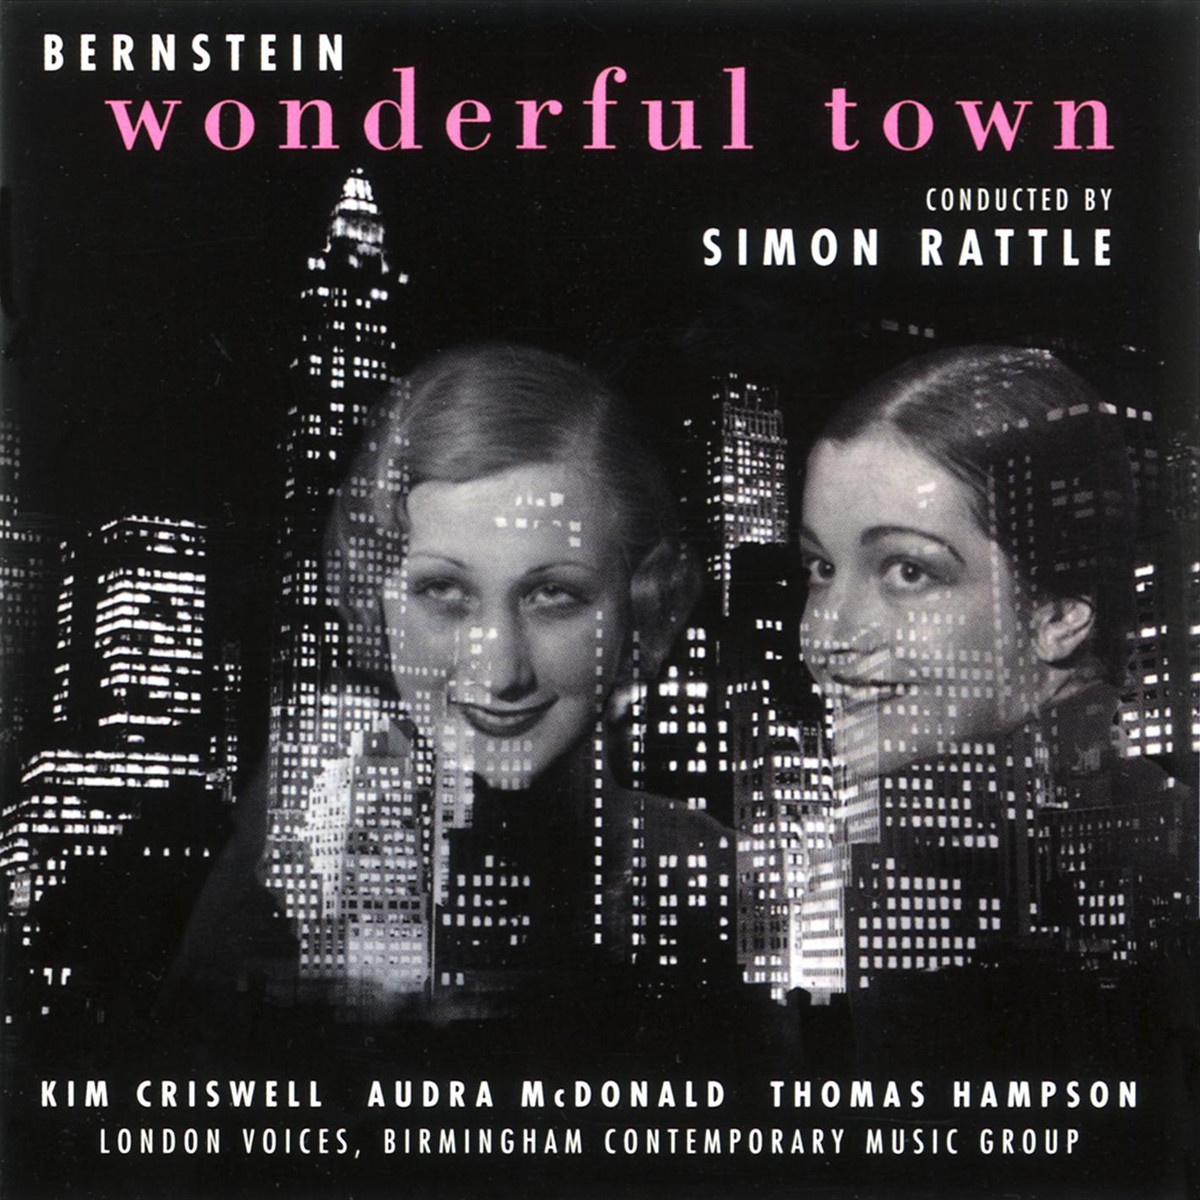 Wonderful Town: What a waste (Baker/ Ruth/First Editor/Second Editor)